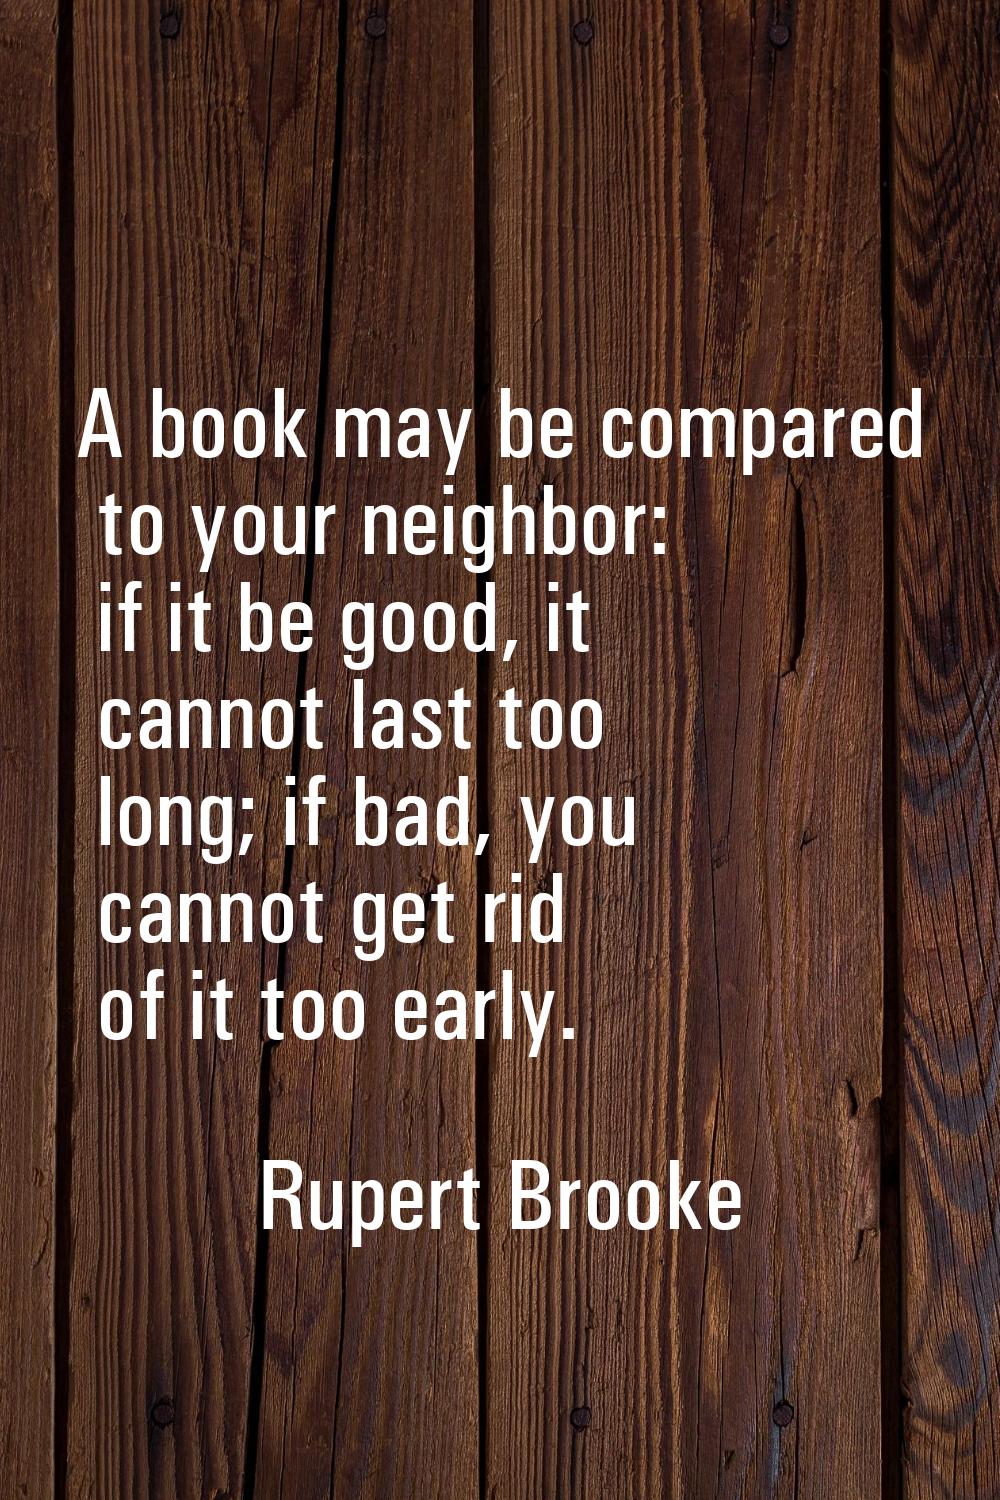 A book may be compared to your neighbor: if it be good, it cannot last too long; if bad, you cannot